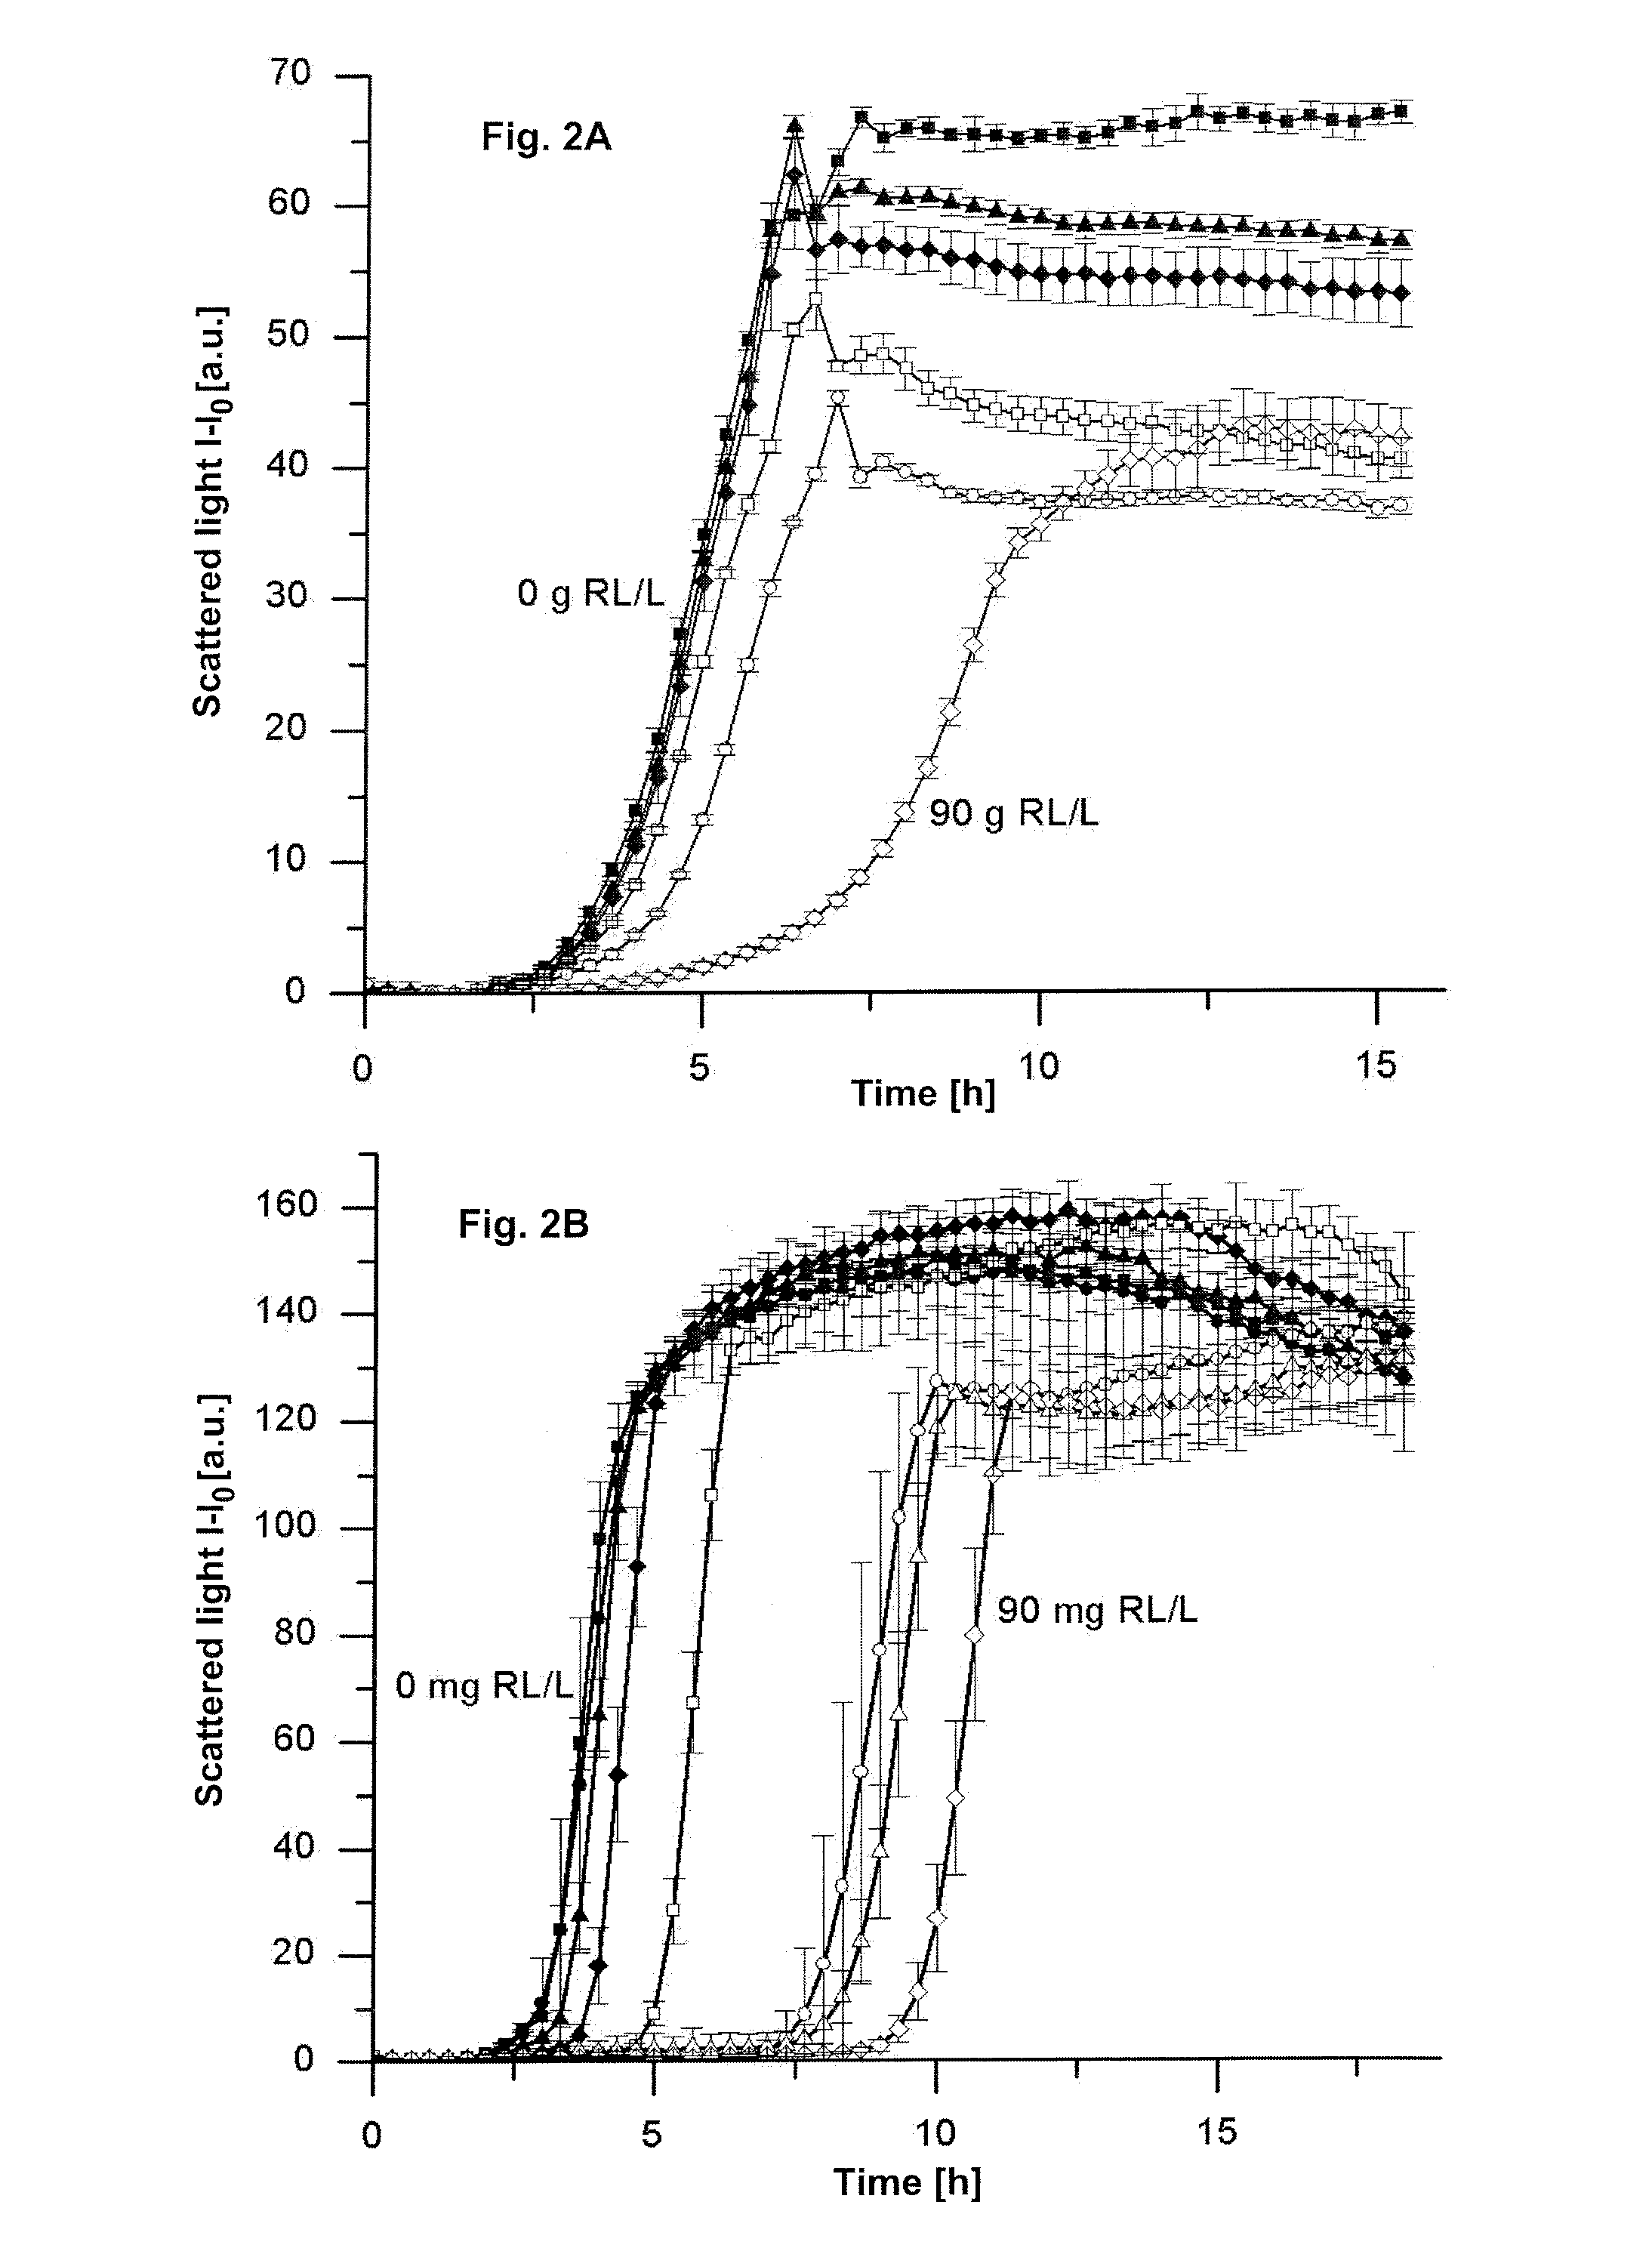 Means and methods for rhamnolipid production